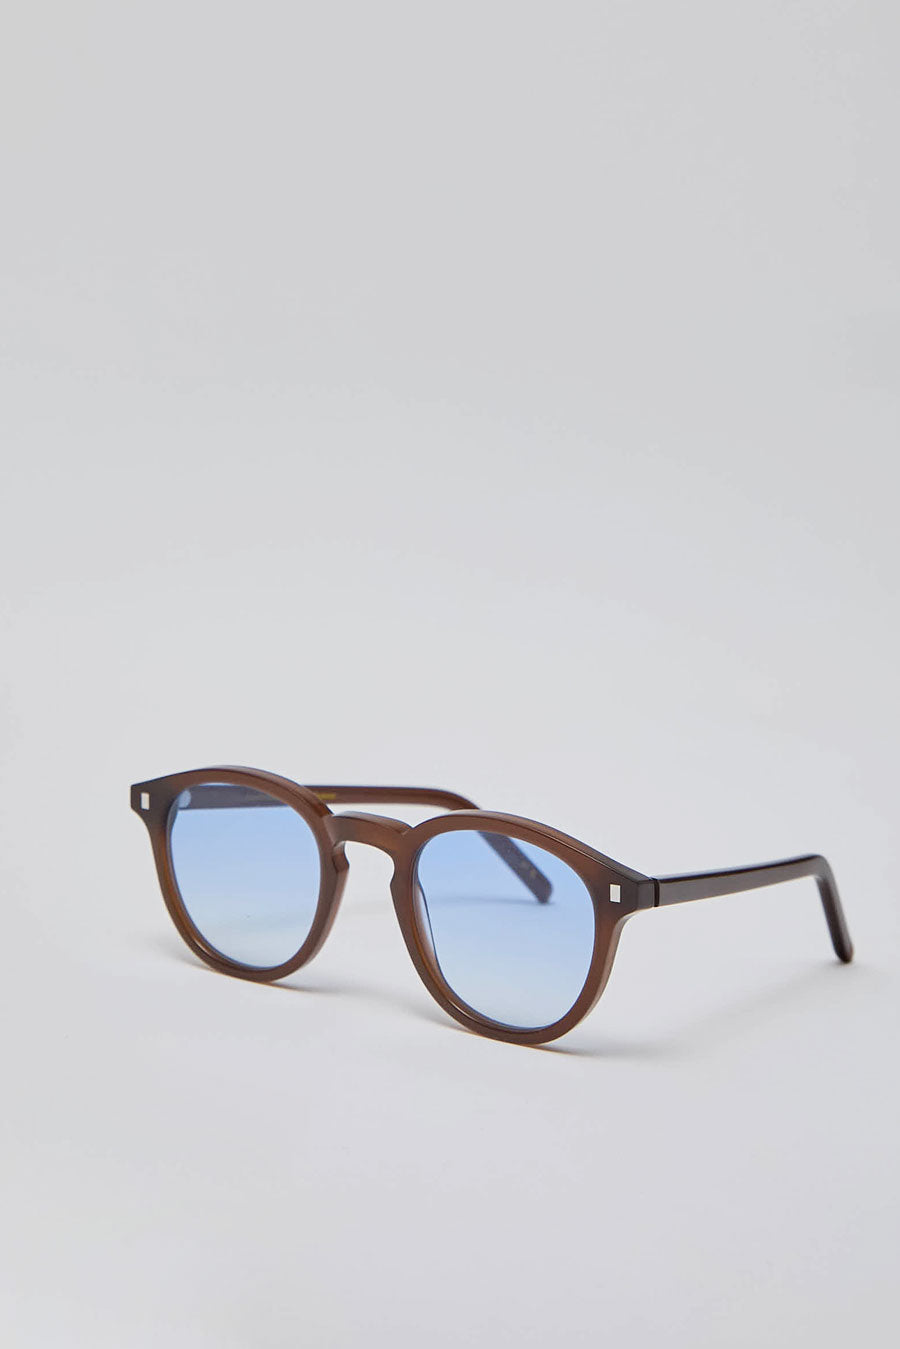 Monokel Nelson Sunglasses in Chocolate and Blue